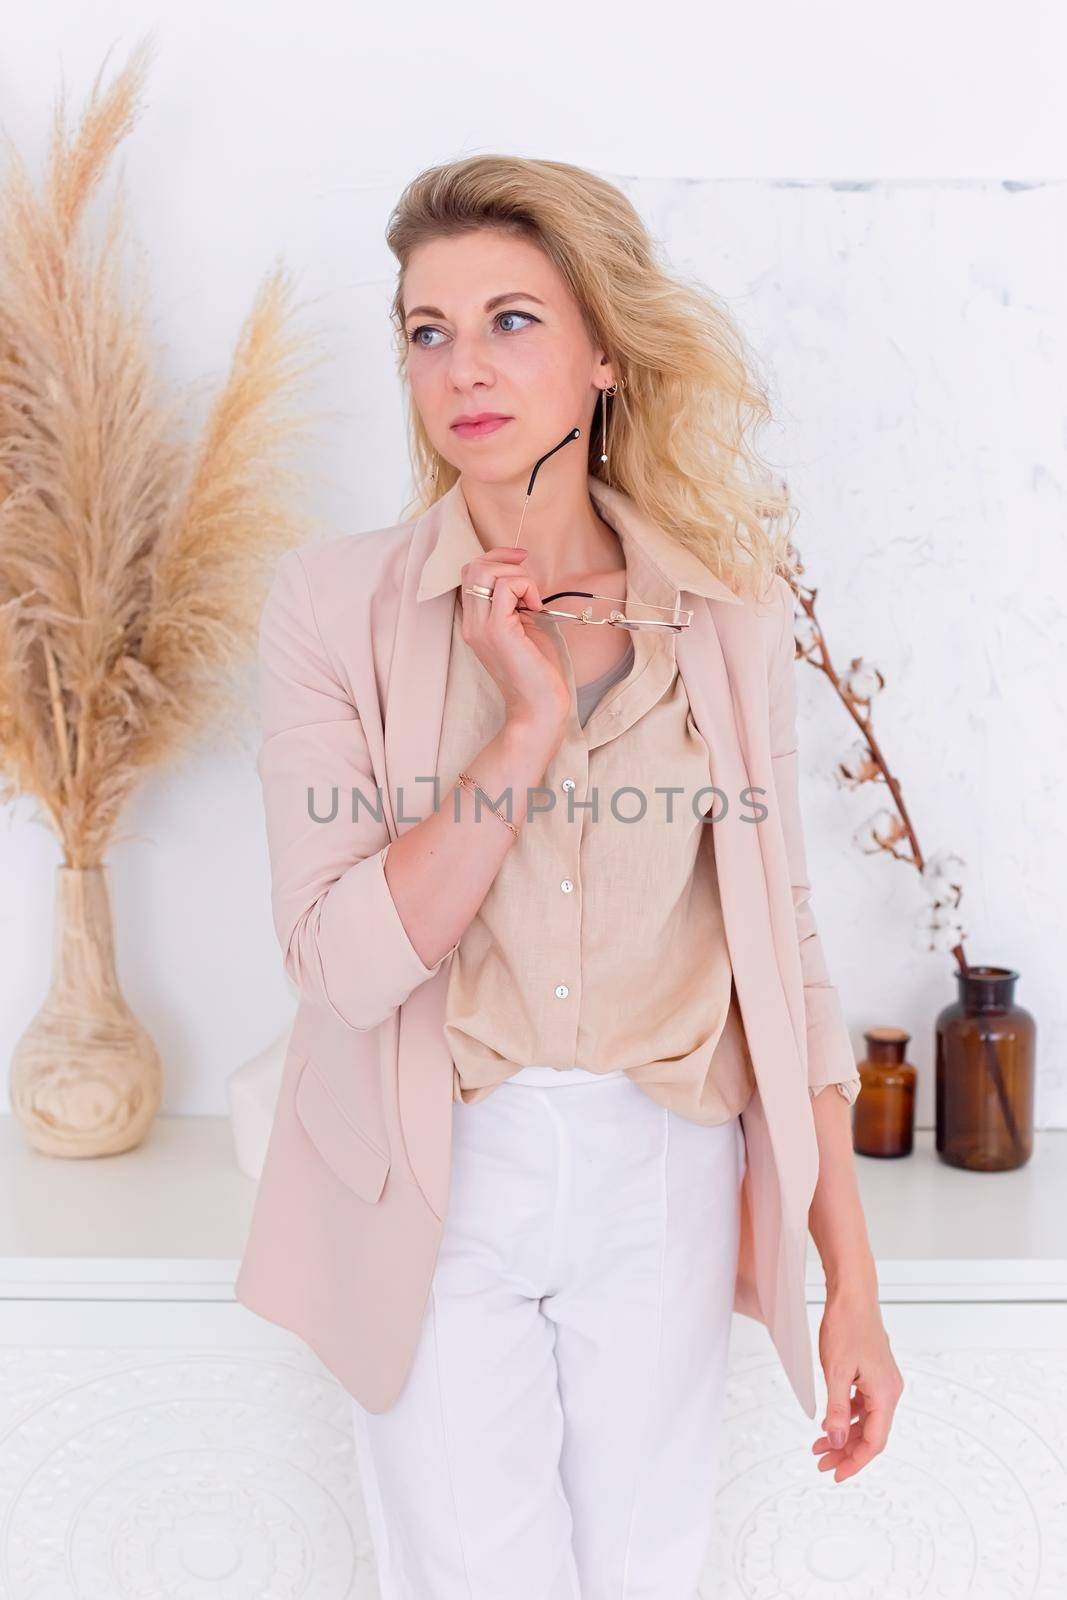 A beautiful woman with blond hair, stands in a light pink jacket in the interior of a white room, look to the side . Copy space. Vertical